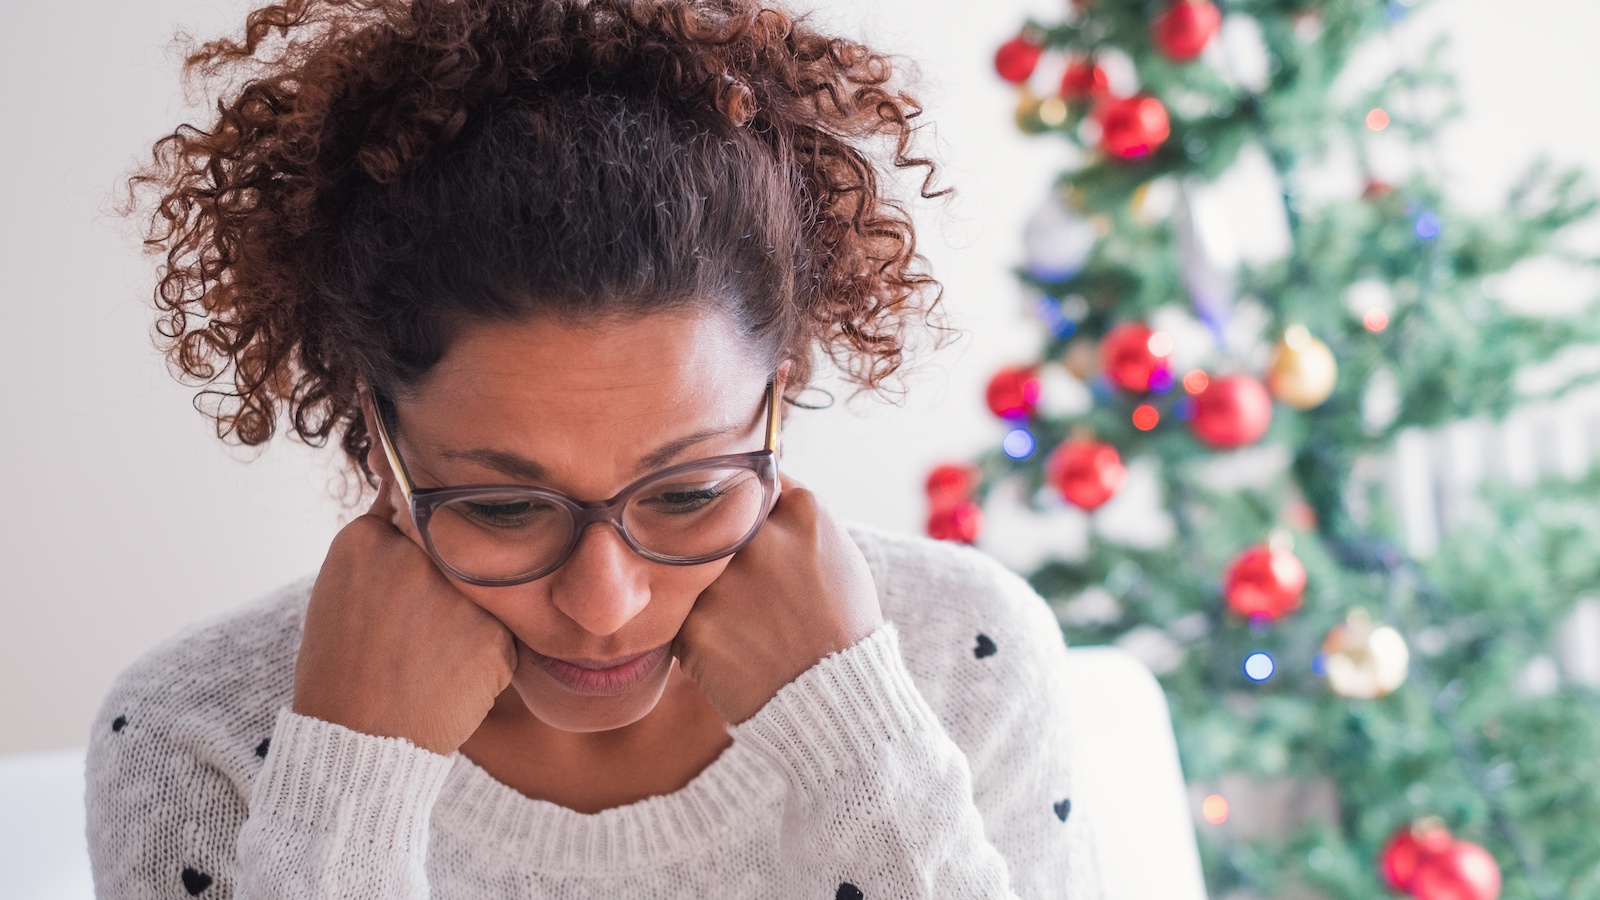 9 Calming Foods to Reduce Anxiety & Stress These Holidays